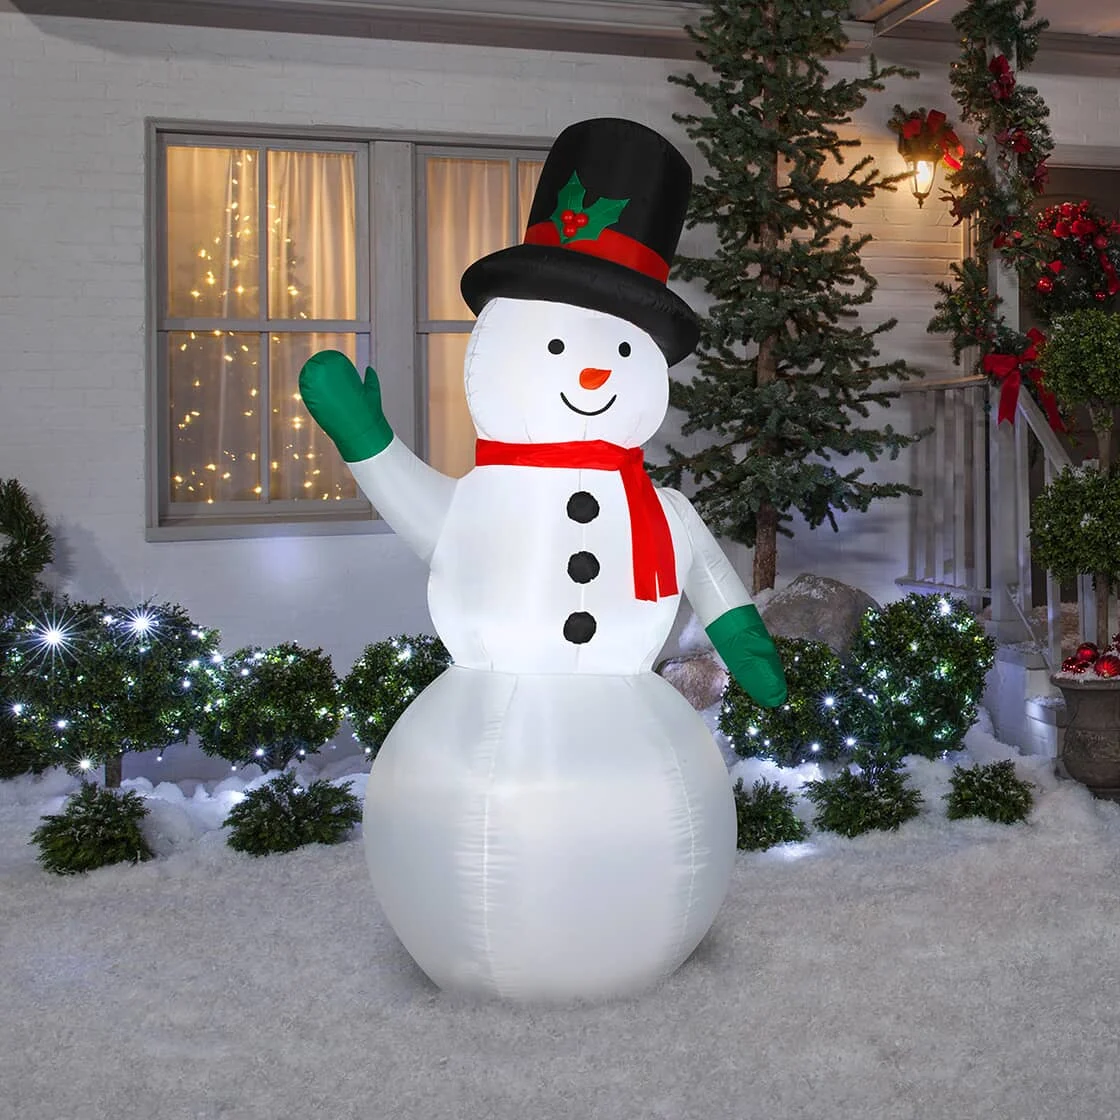 Here’s How to Prepare Your Outdoors & Home for Christmas Décor | Home ...